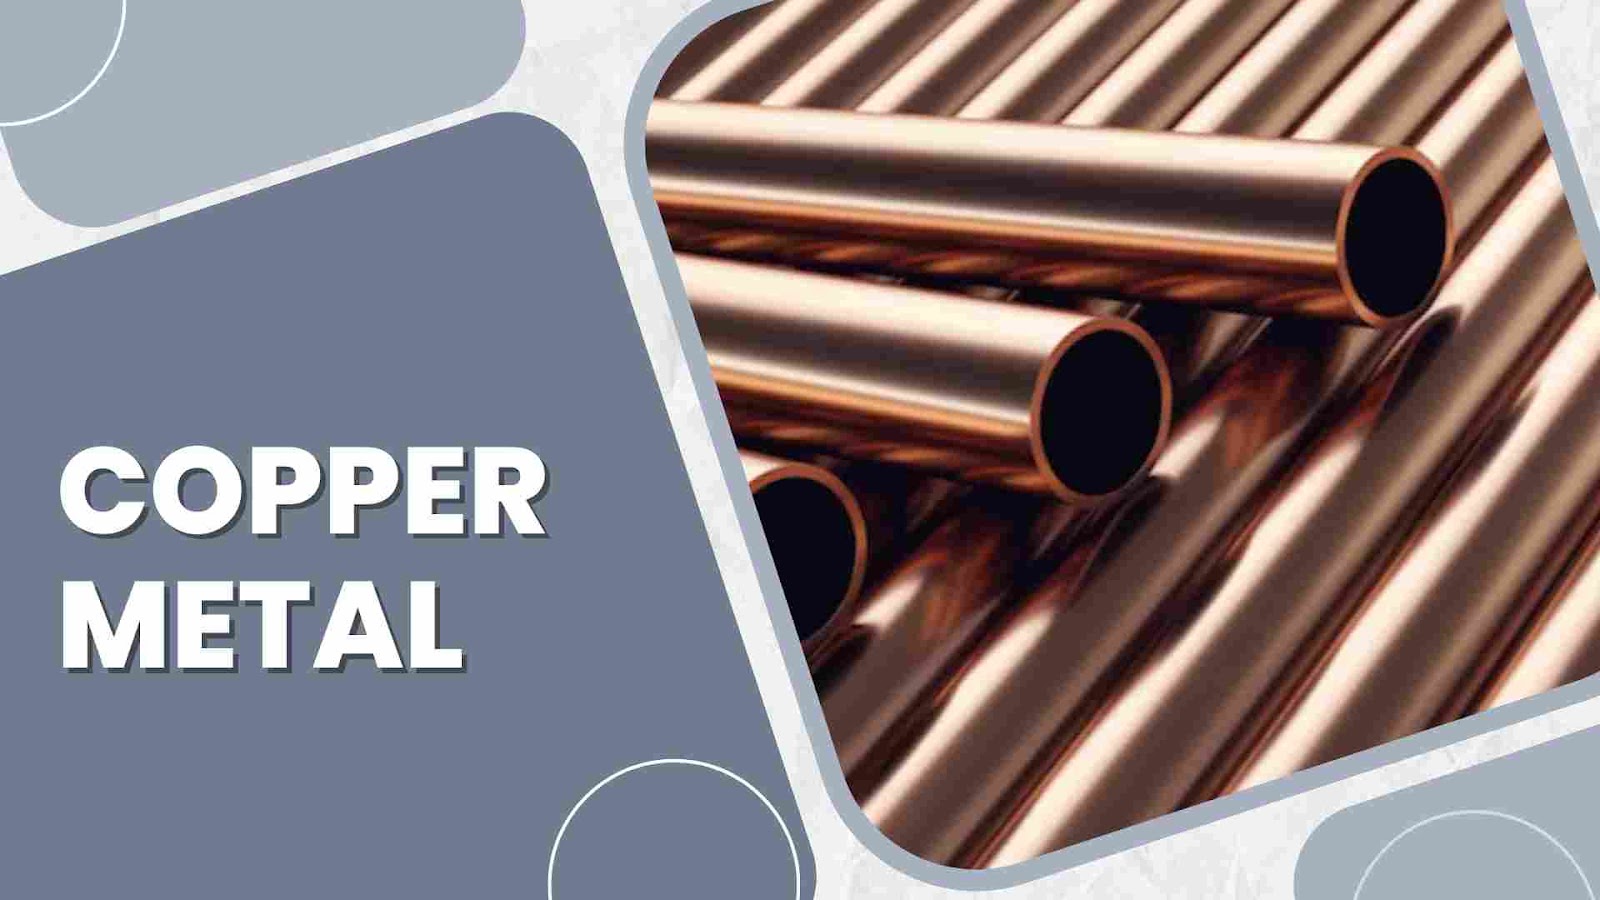 Uses of Copper Metal